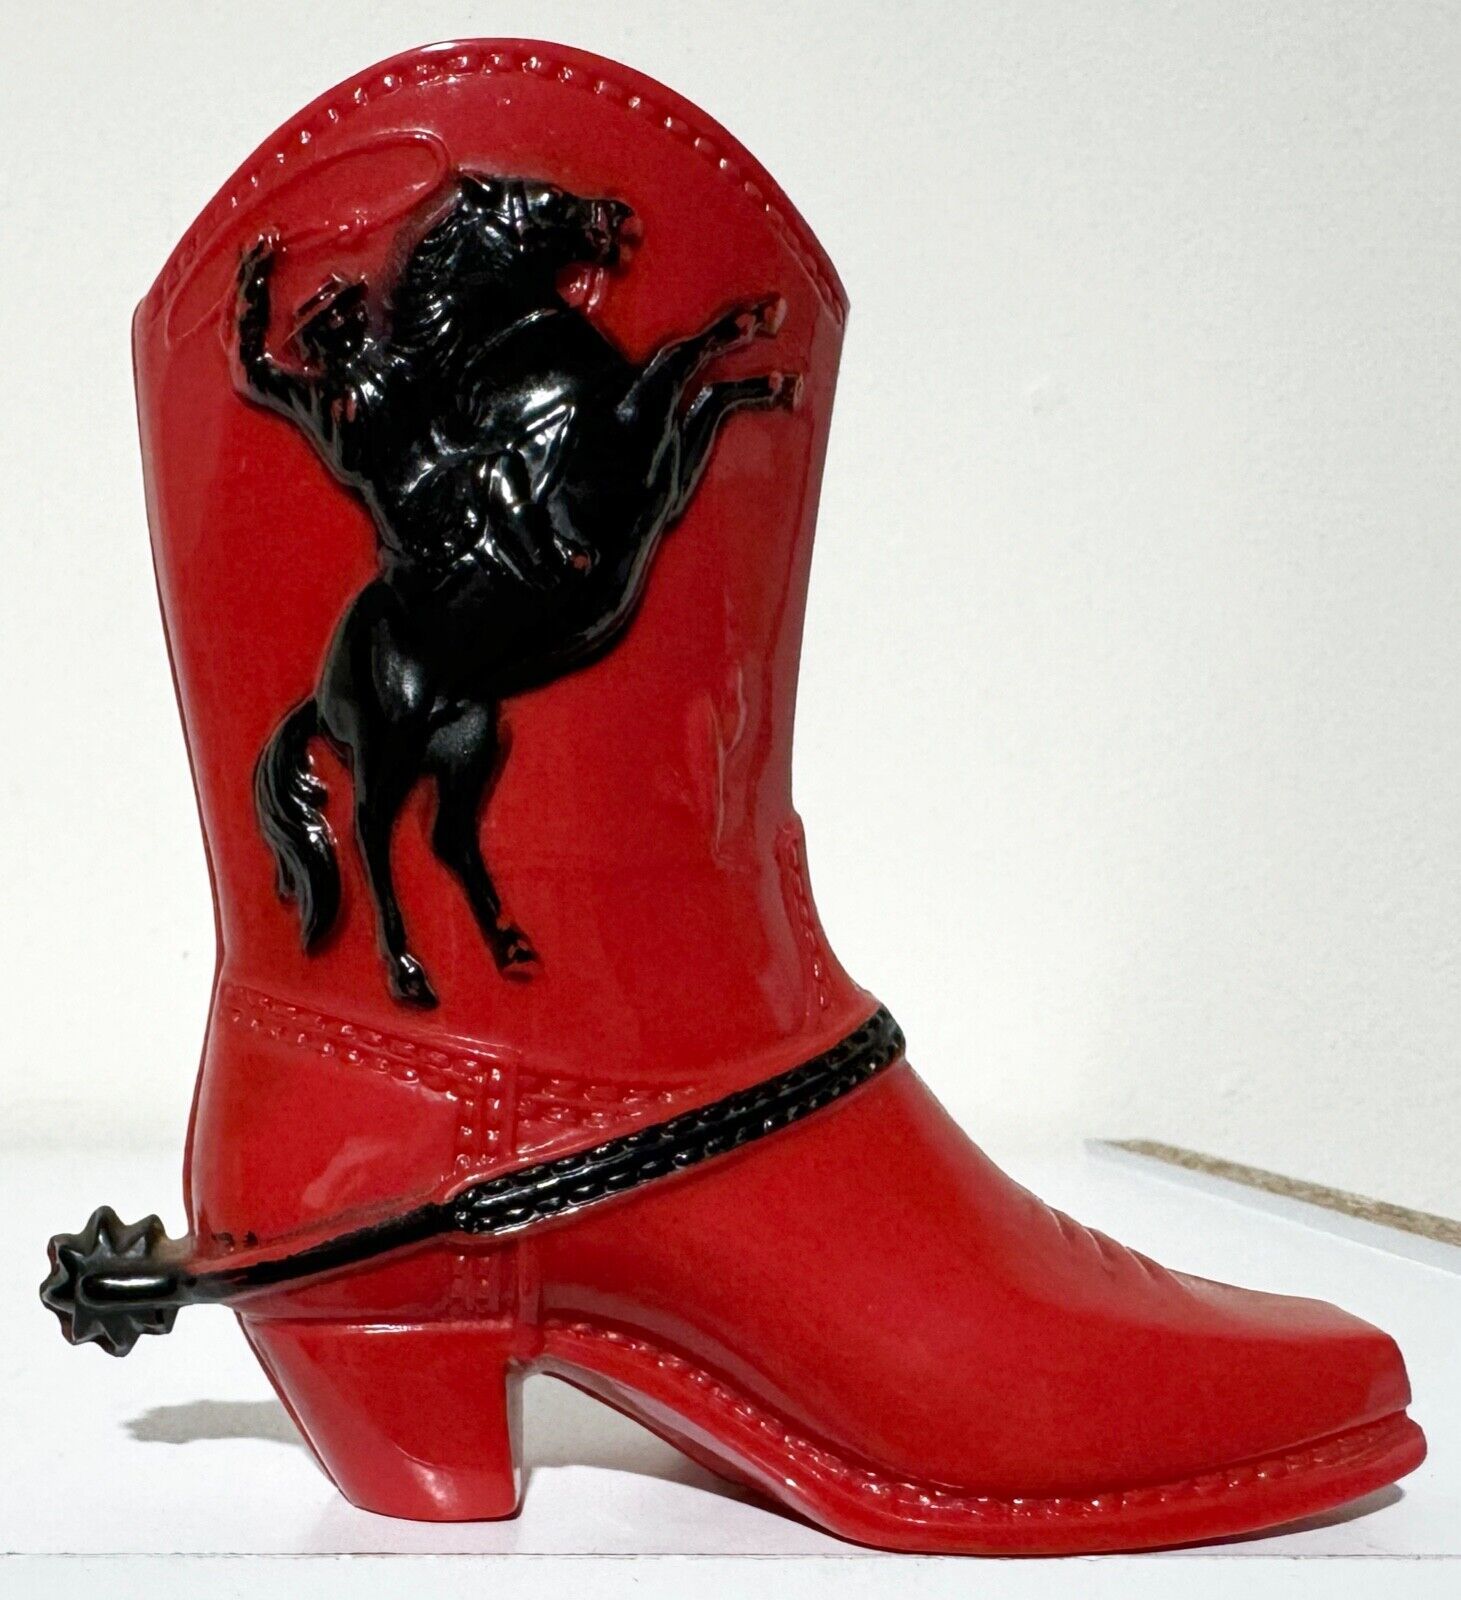 Vintage 1950s Toy Cowboy Boot COIN BANK Hard Plastic Red Western Horse Lasso - $11.86